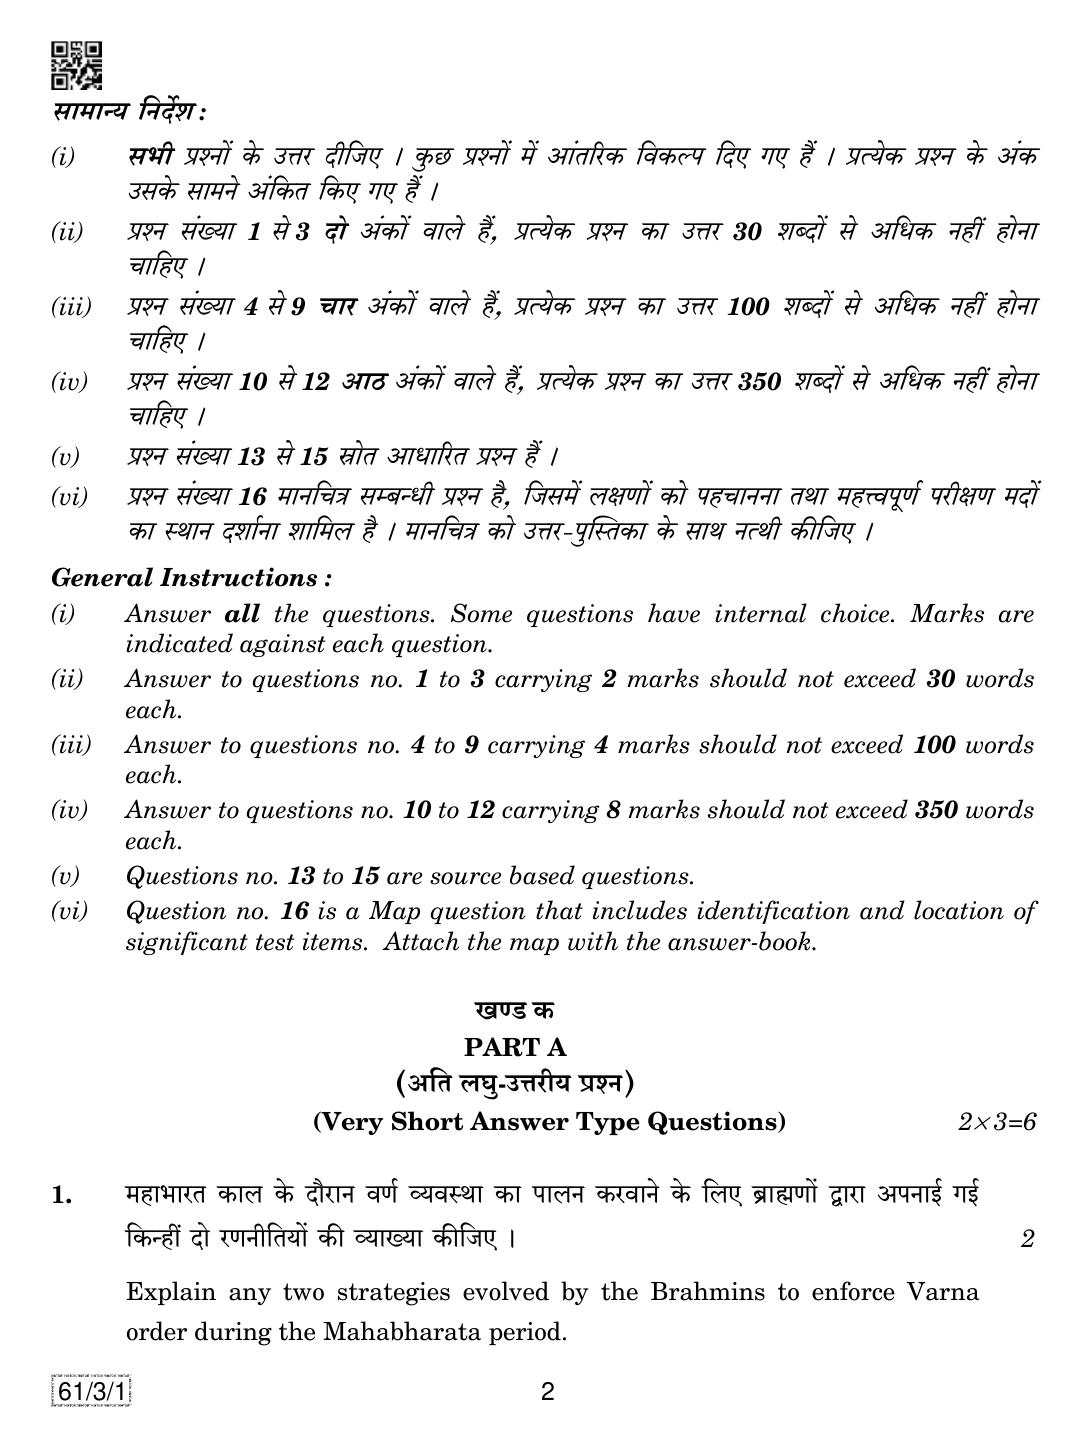 CBSE Class 12 61-3-1 History 2019 Question Paper - Page 2